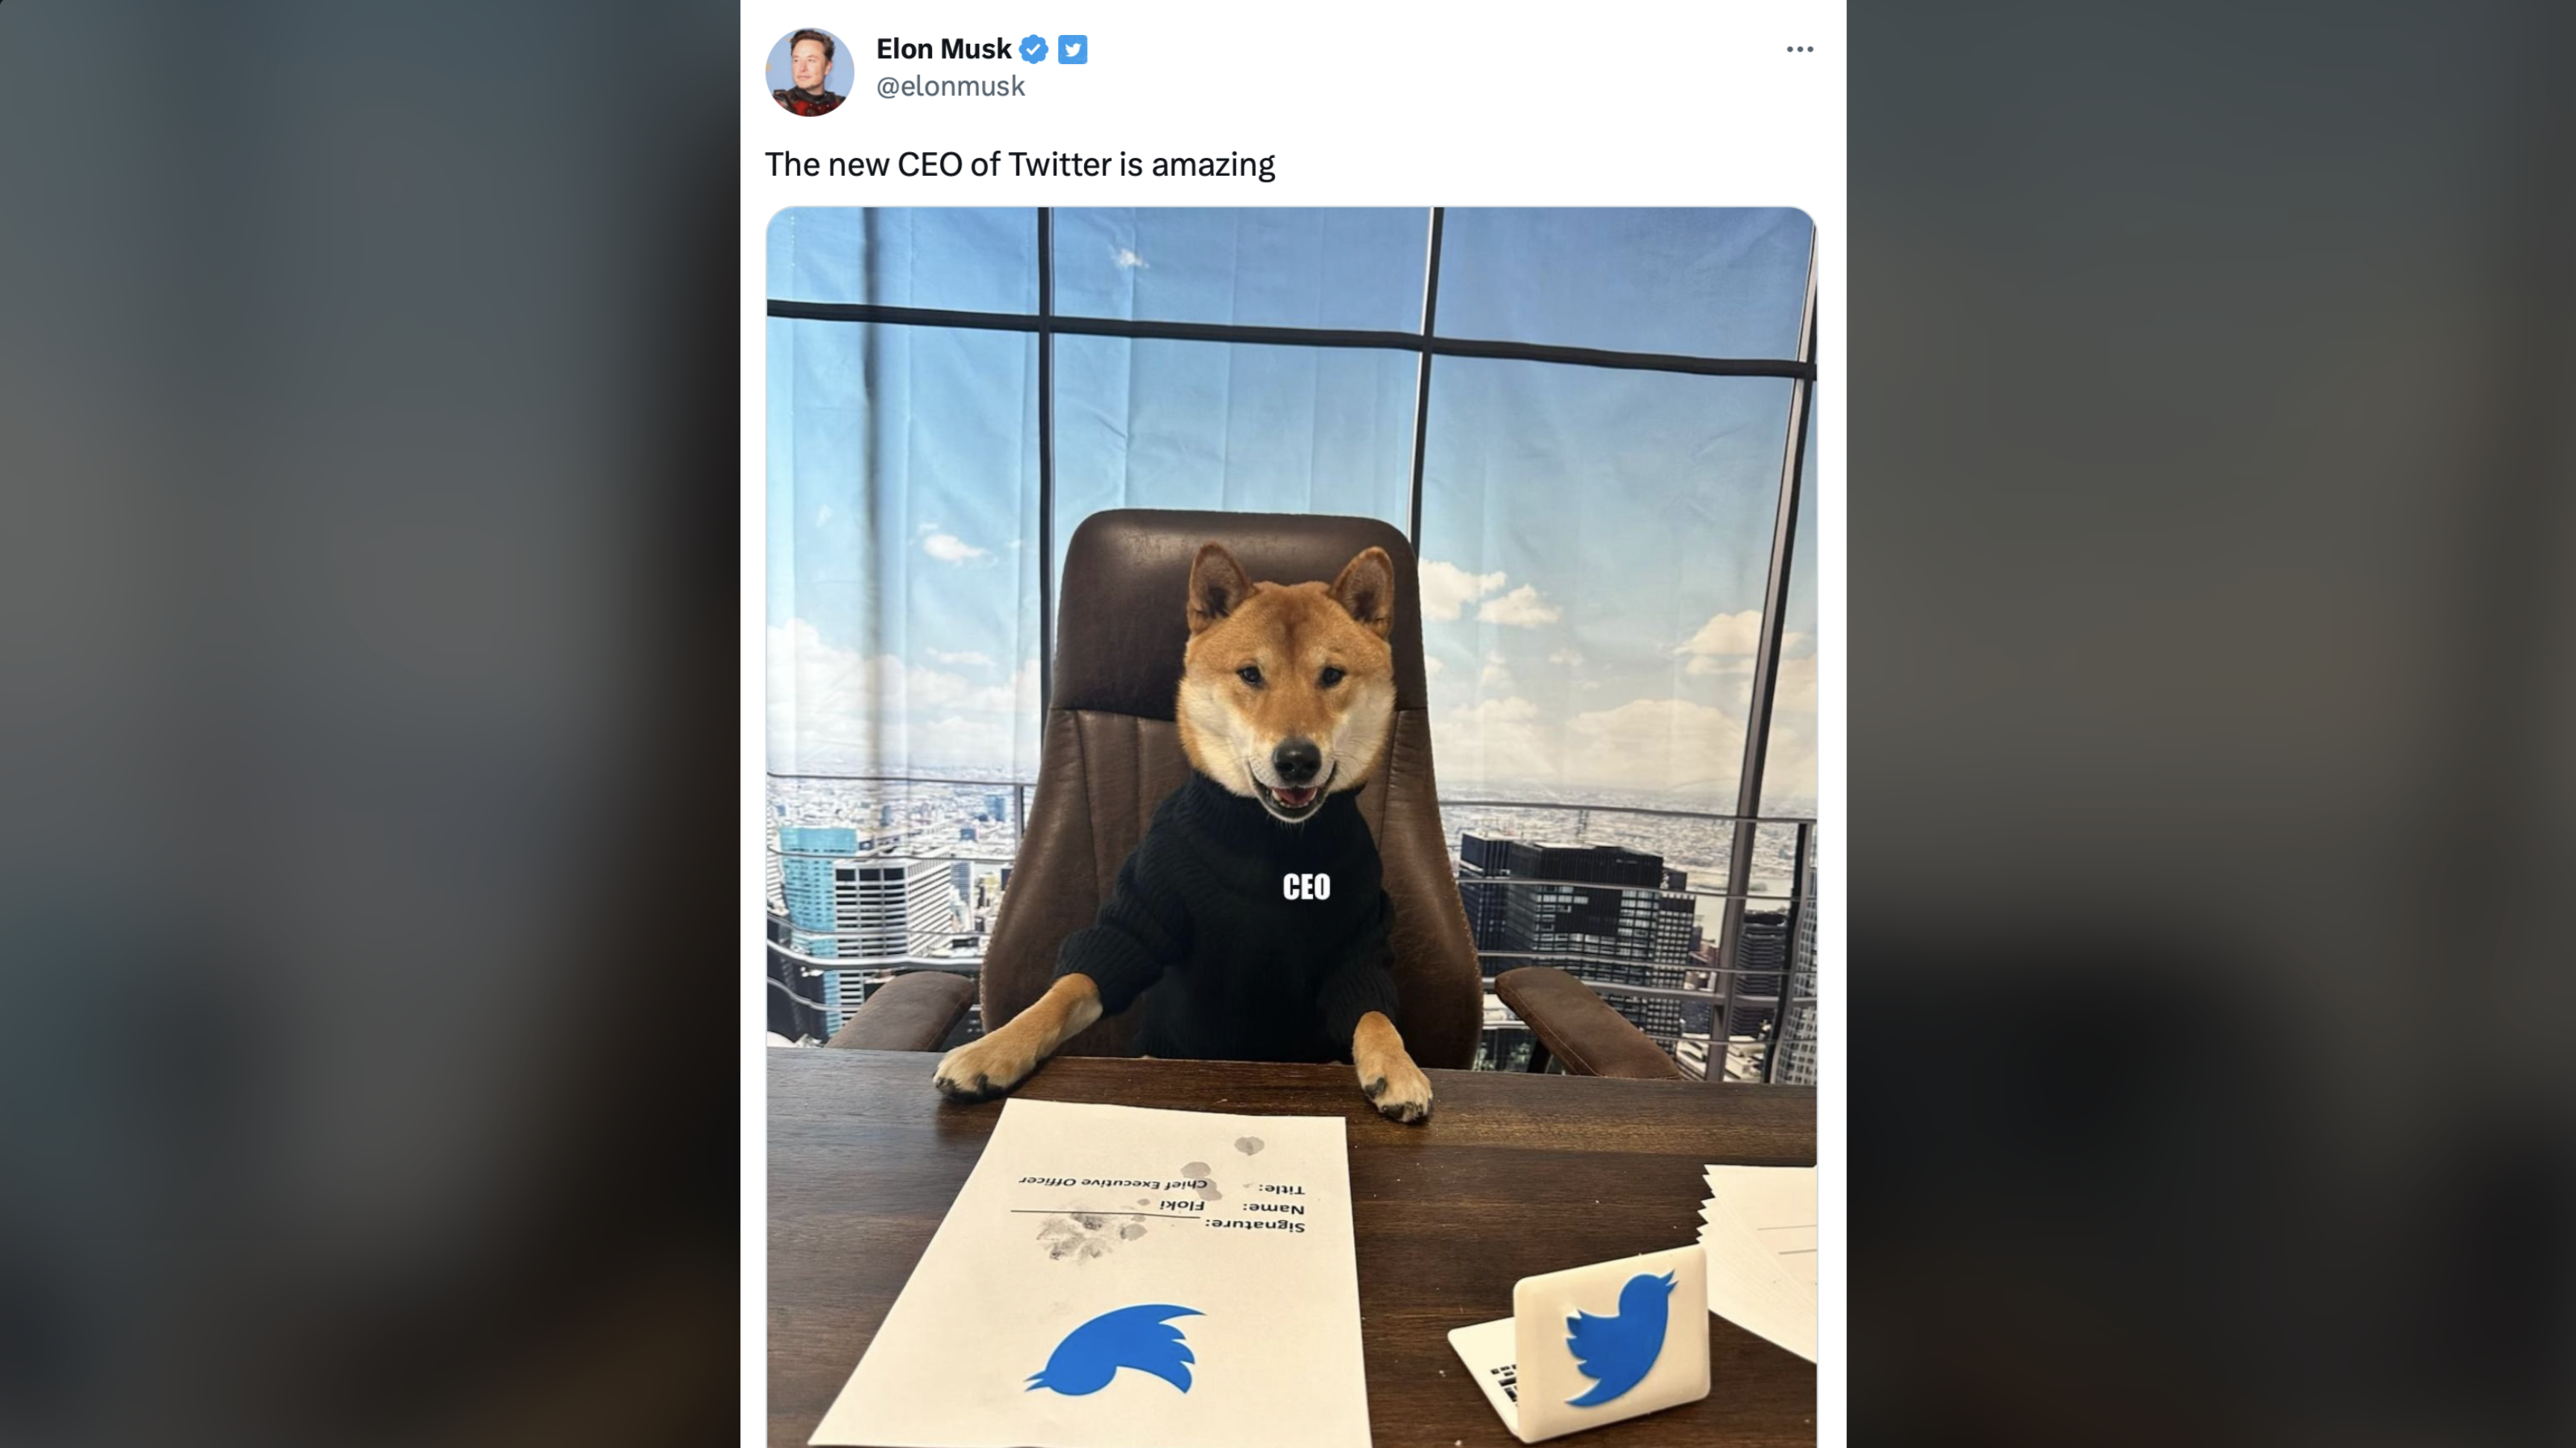 Elon Says He’s Sleeping on the Couch at Twitter and That His Dog is CEO in Surprise BBC Interview